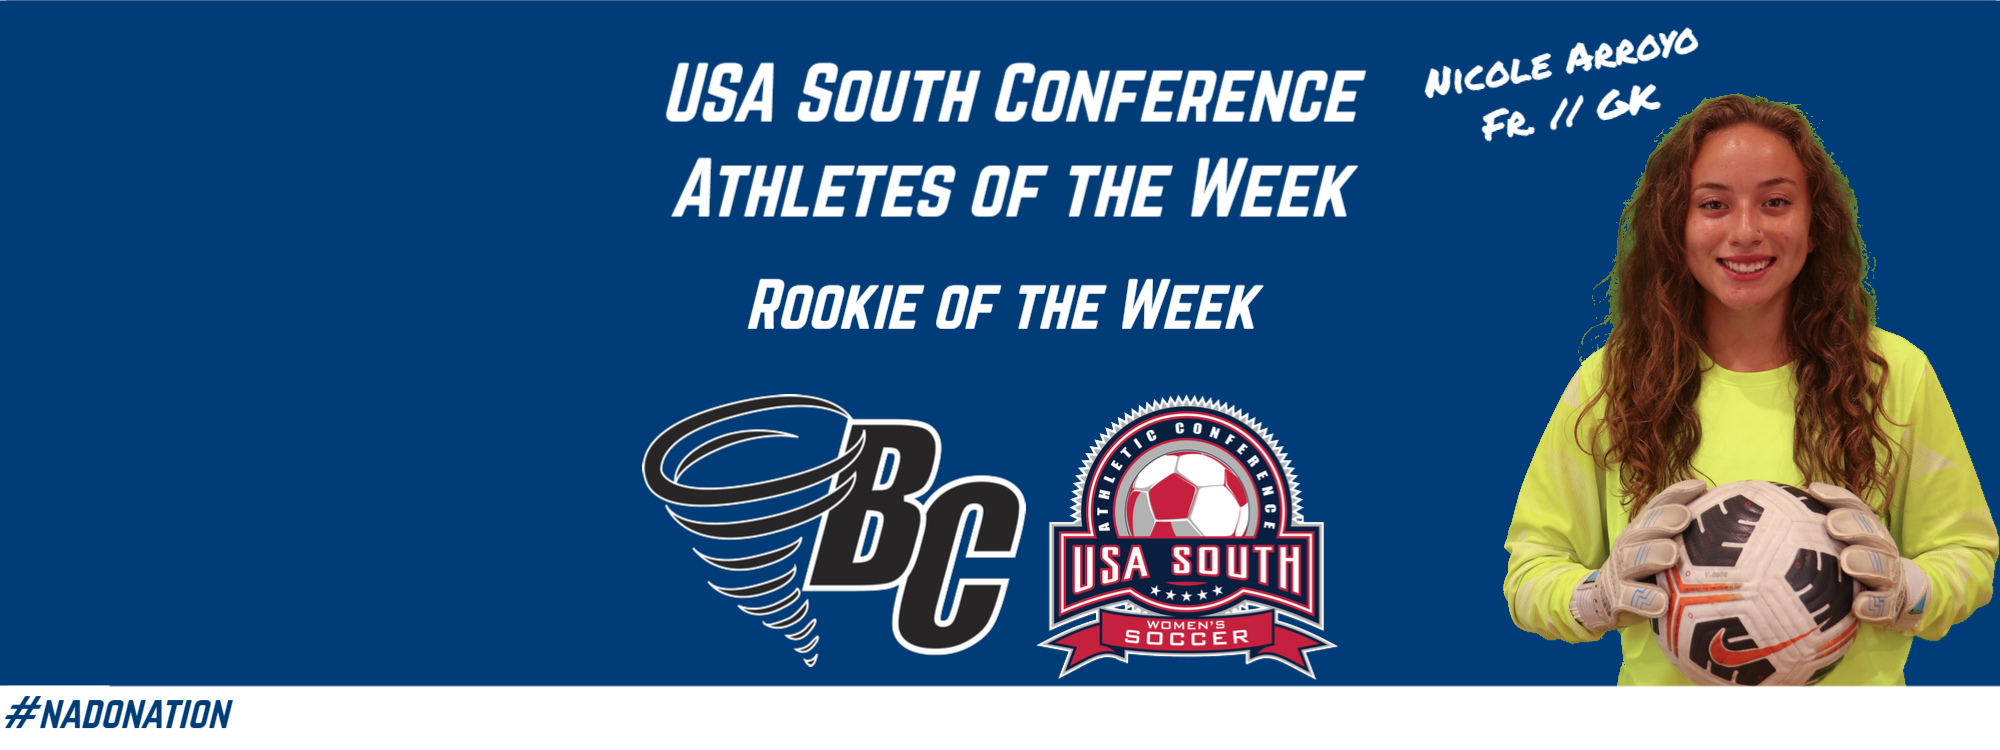 Nicole Arroyo Selected as USA South Rookie of the Week